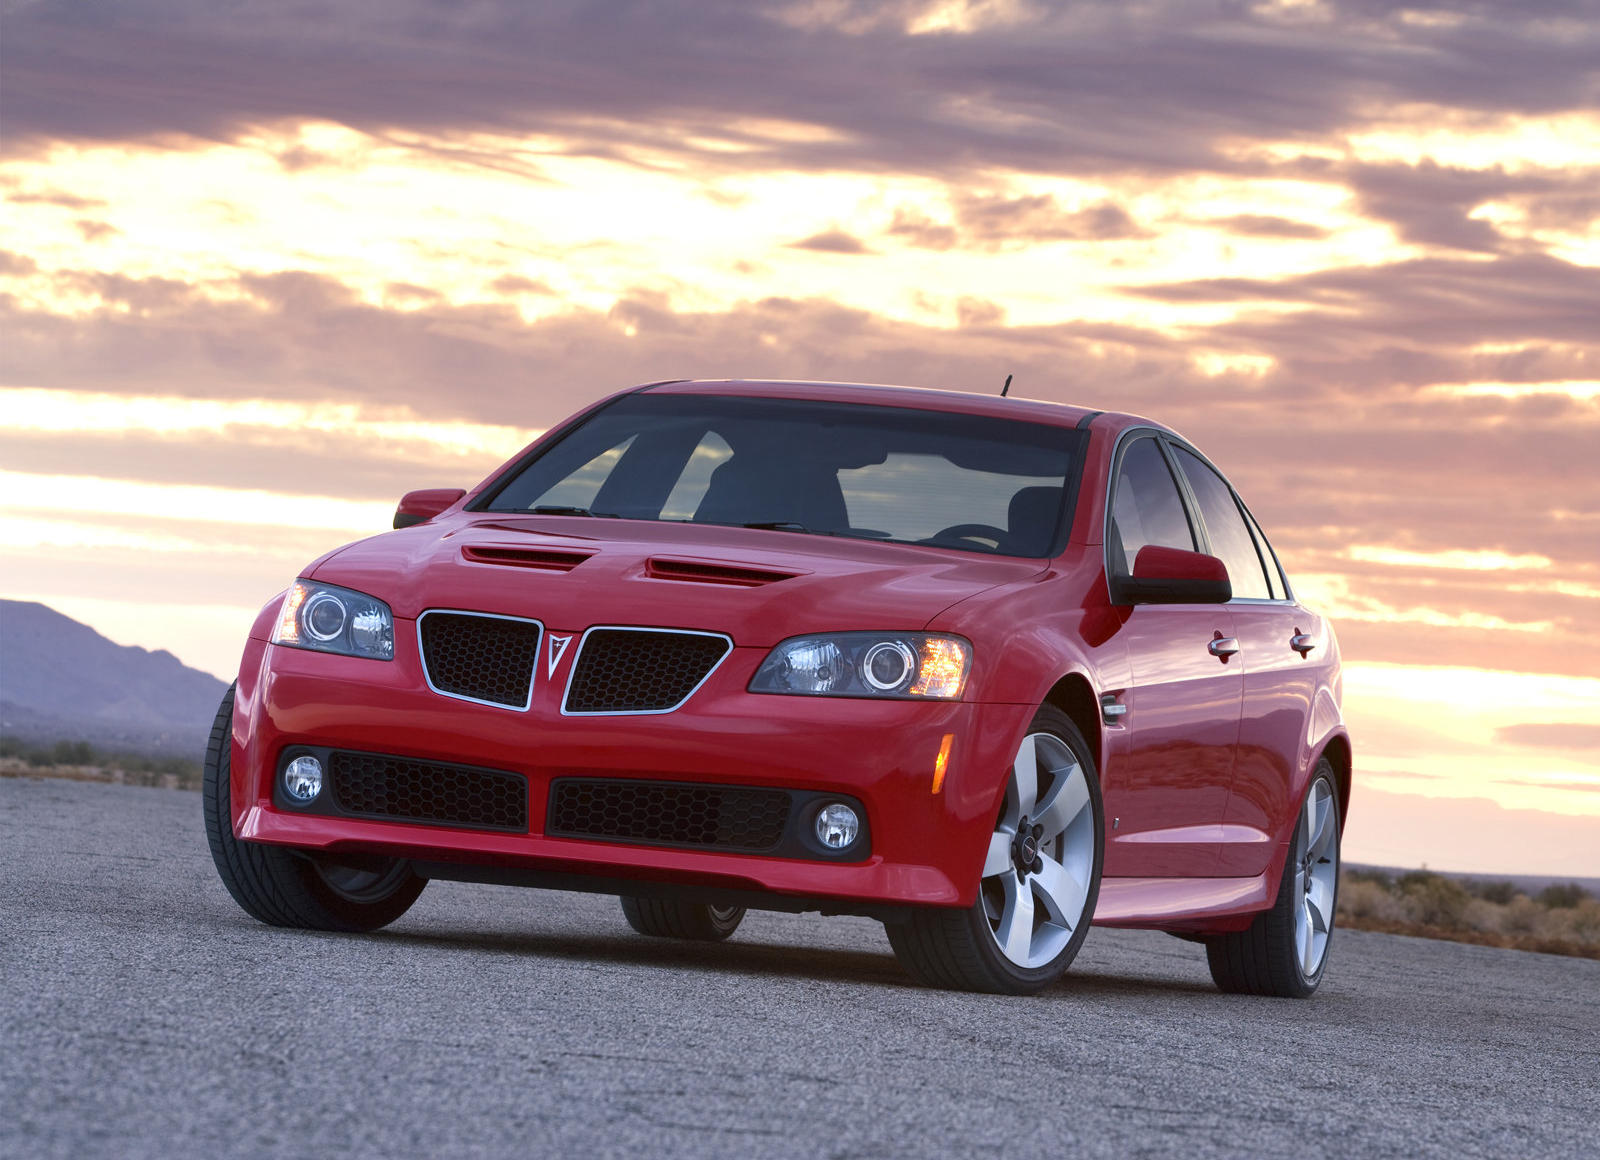 2008 Pontiac G8 Front Angle View